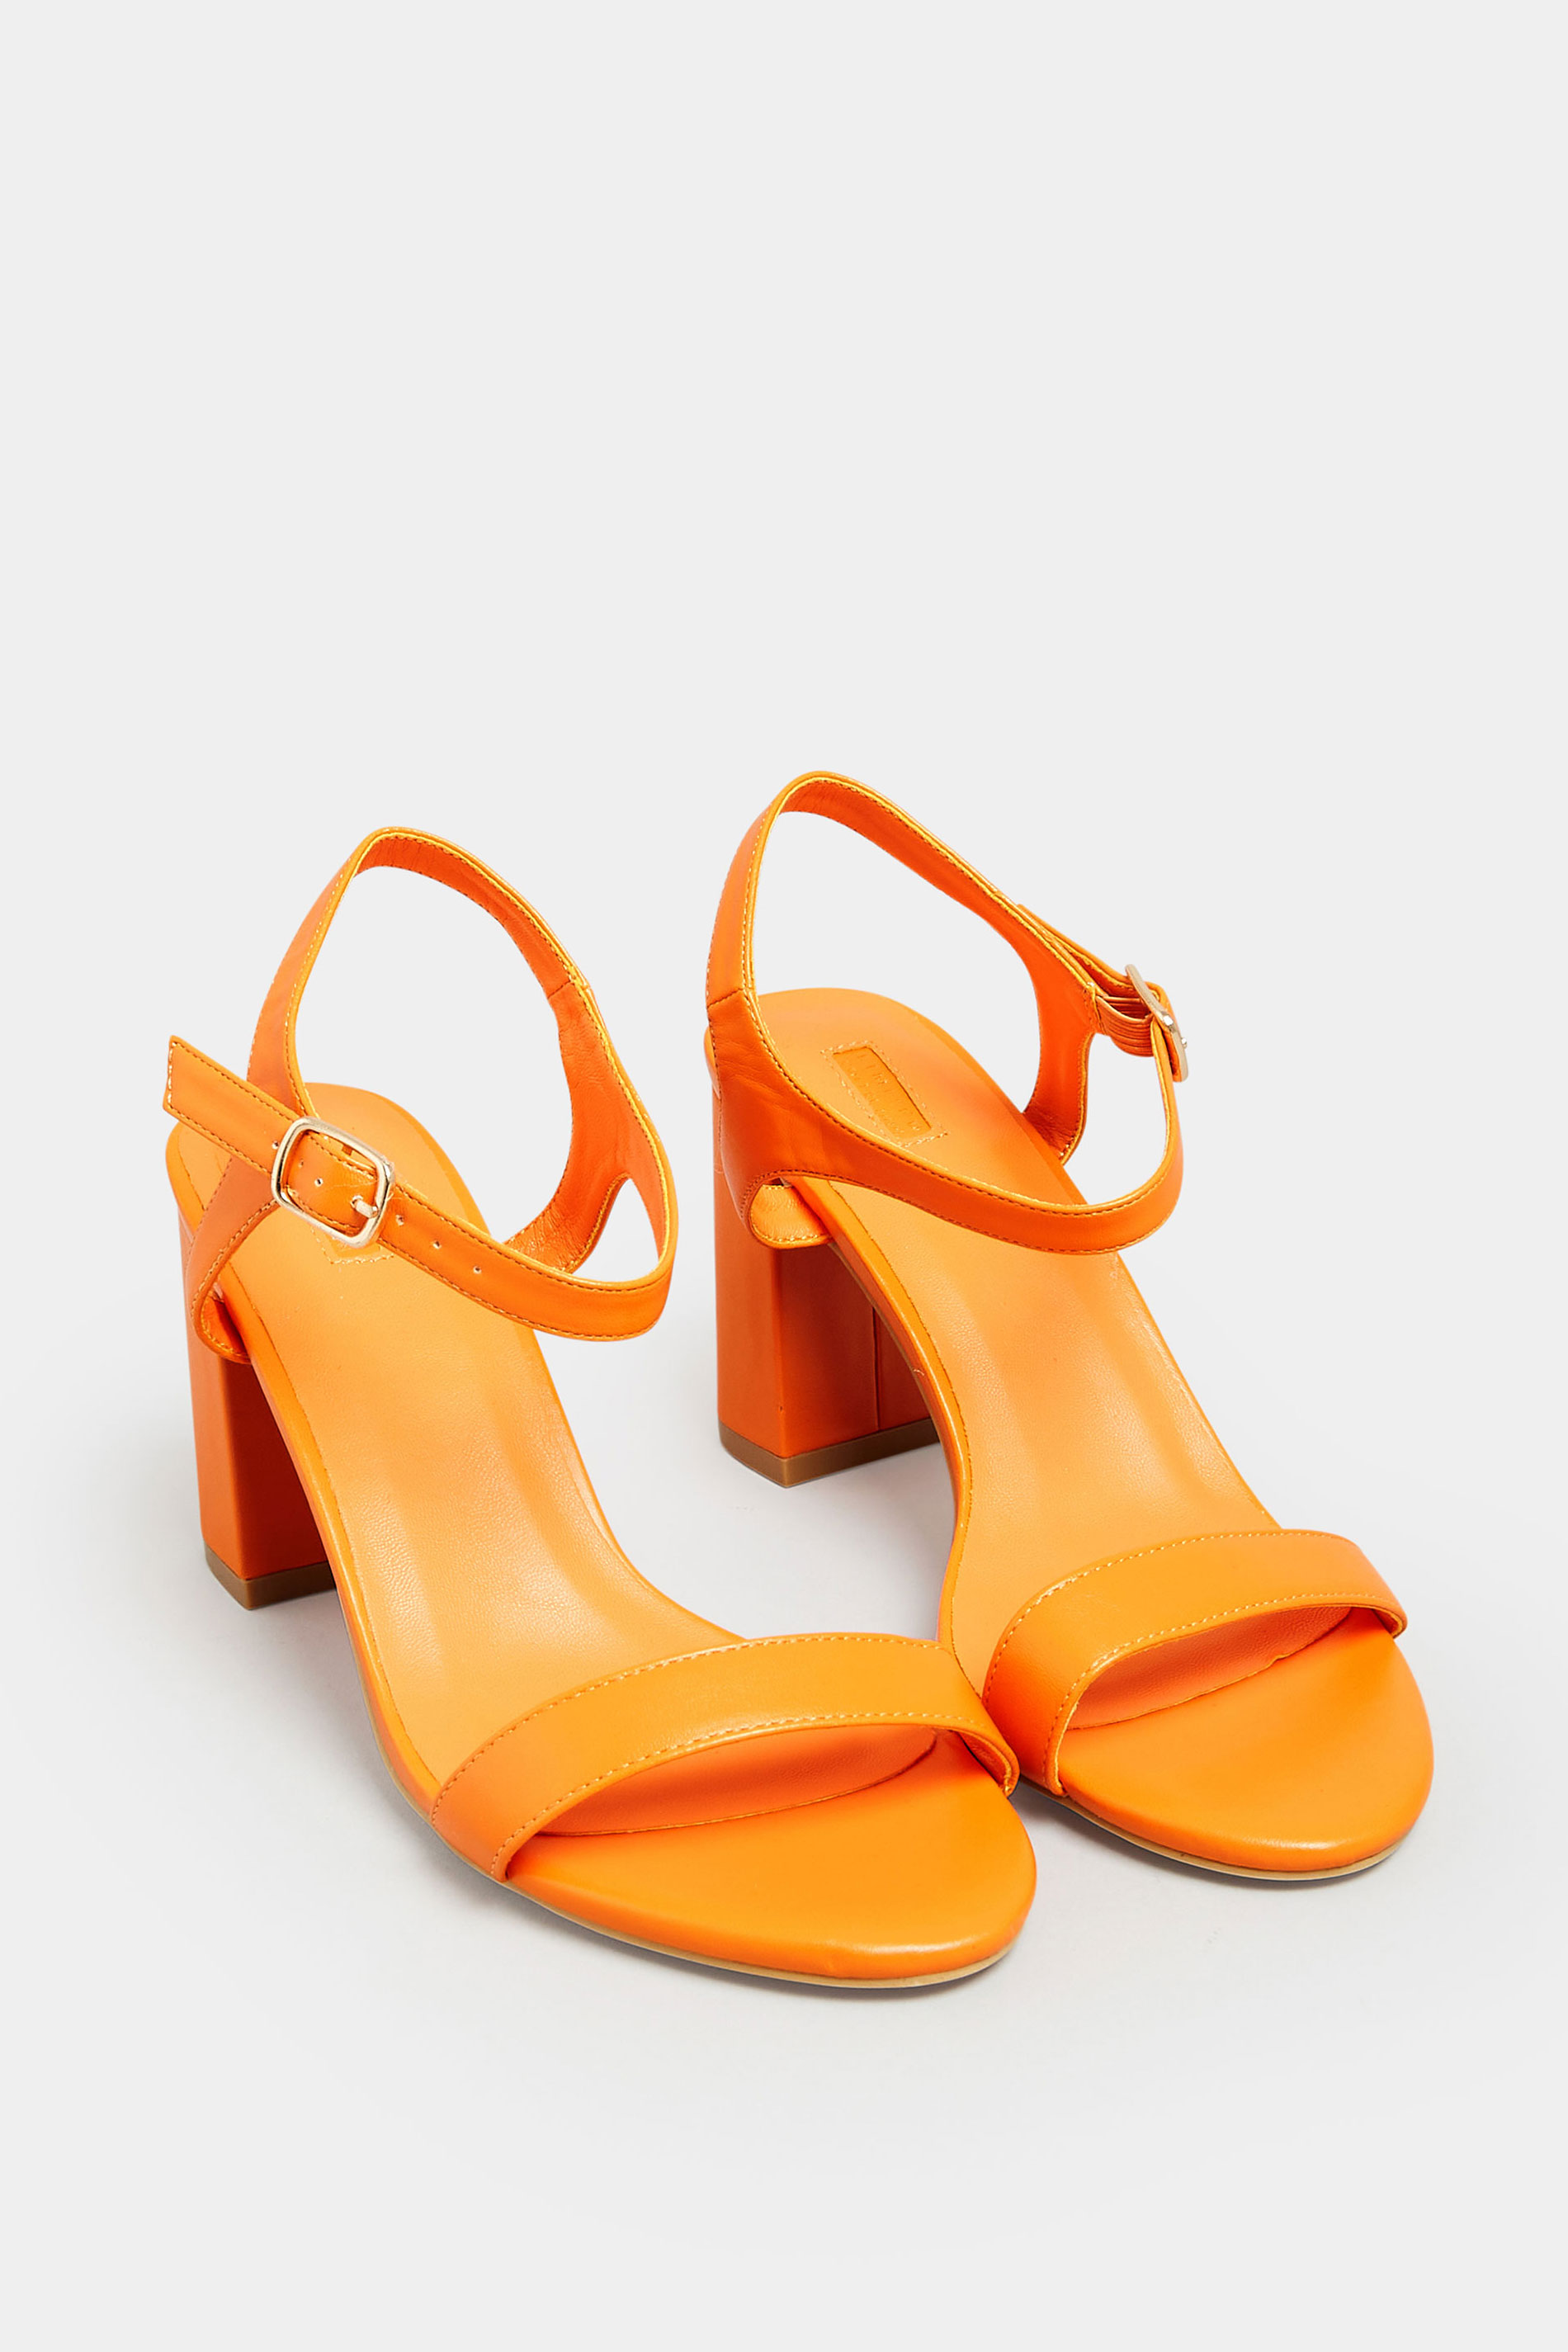 LIMITED COLLECTION Orange Block Heel Sandal In Wide E Fit & Extra Wide Fit | Yours Clothing 2